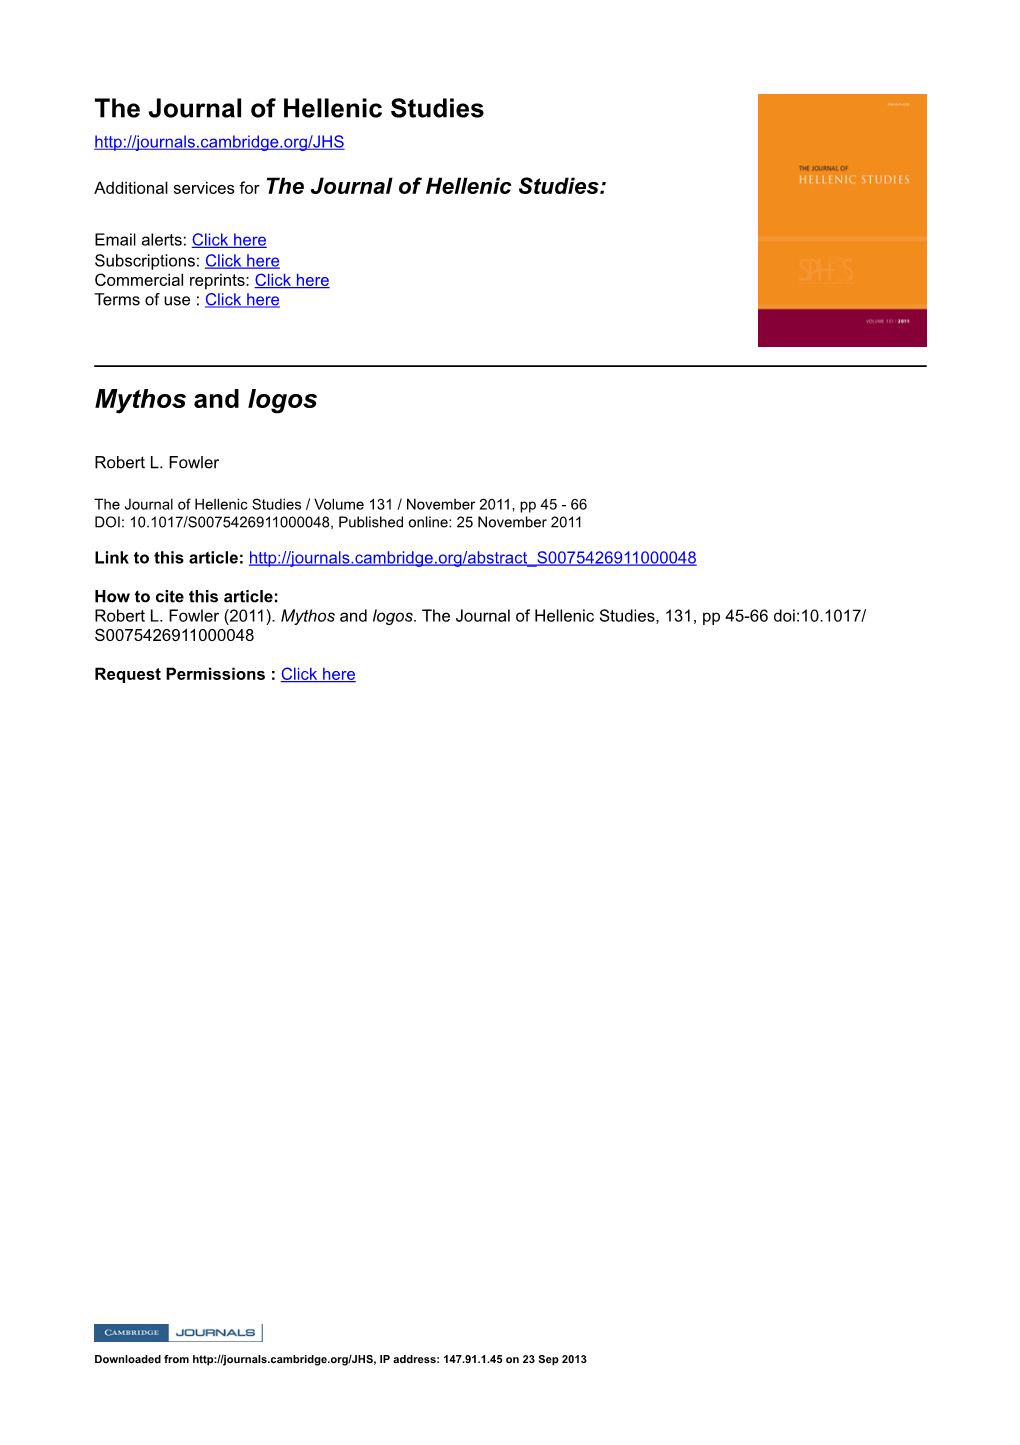 The Journal of Hellenic Studies Mythos and Logos